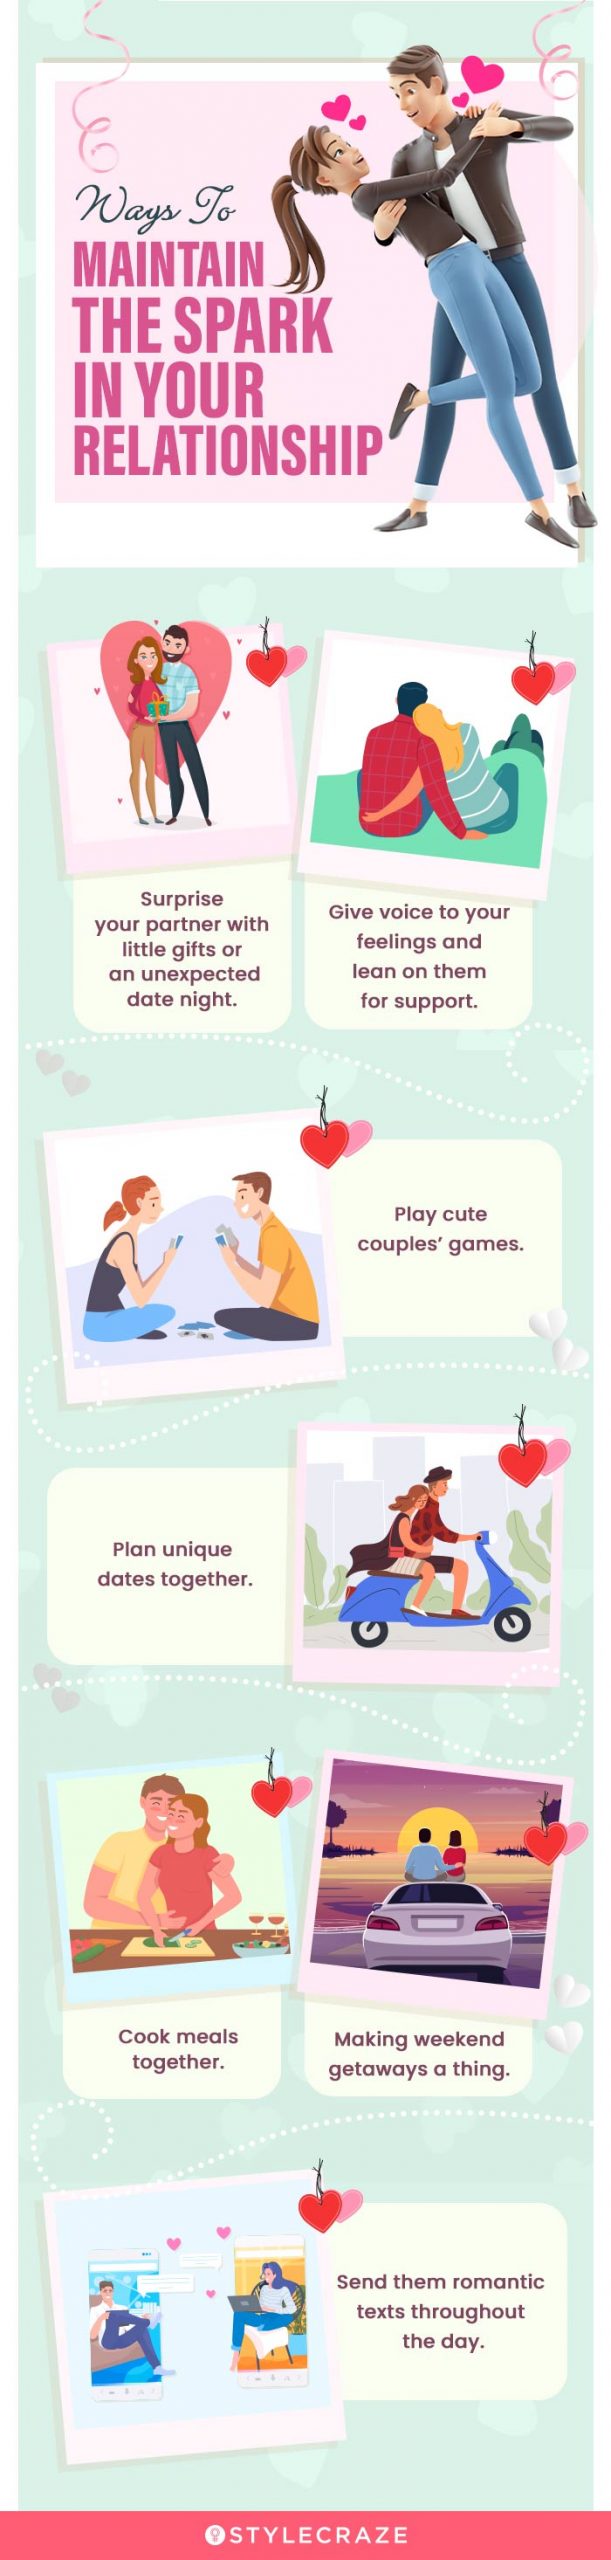 ways to maintain the spark in your relationship(infographic)